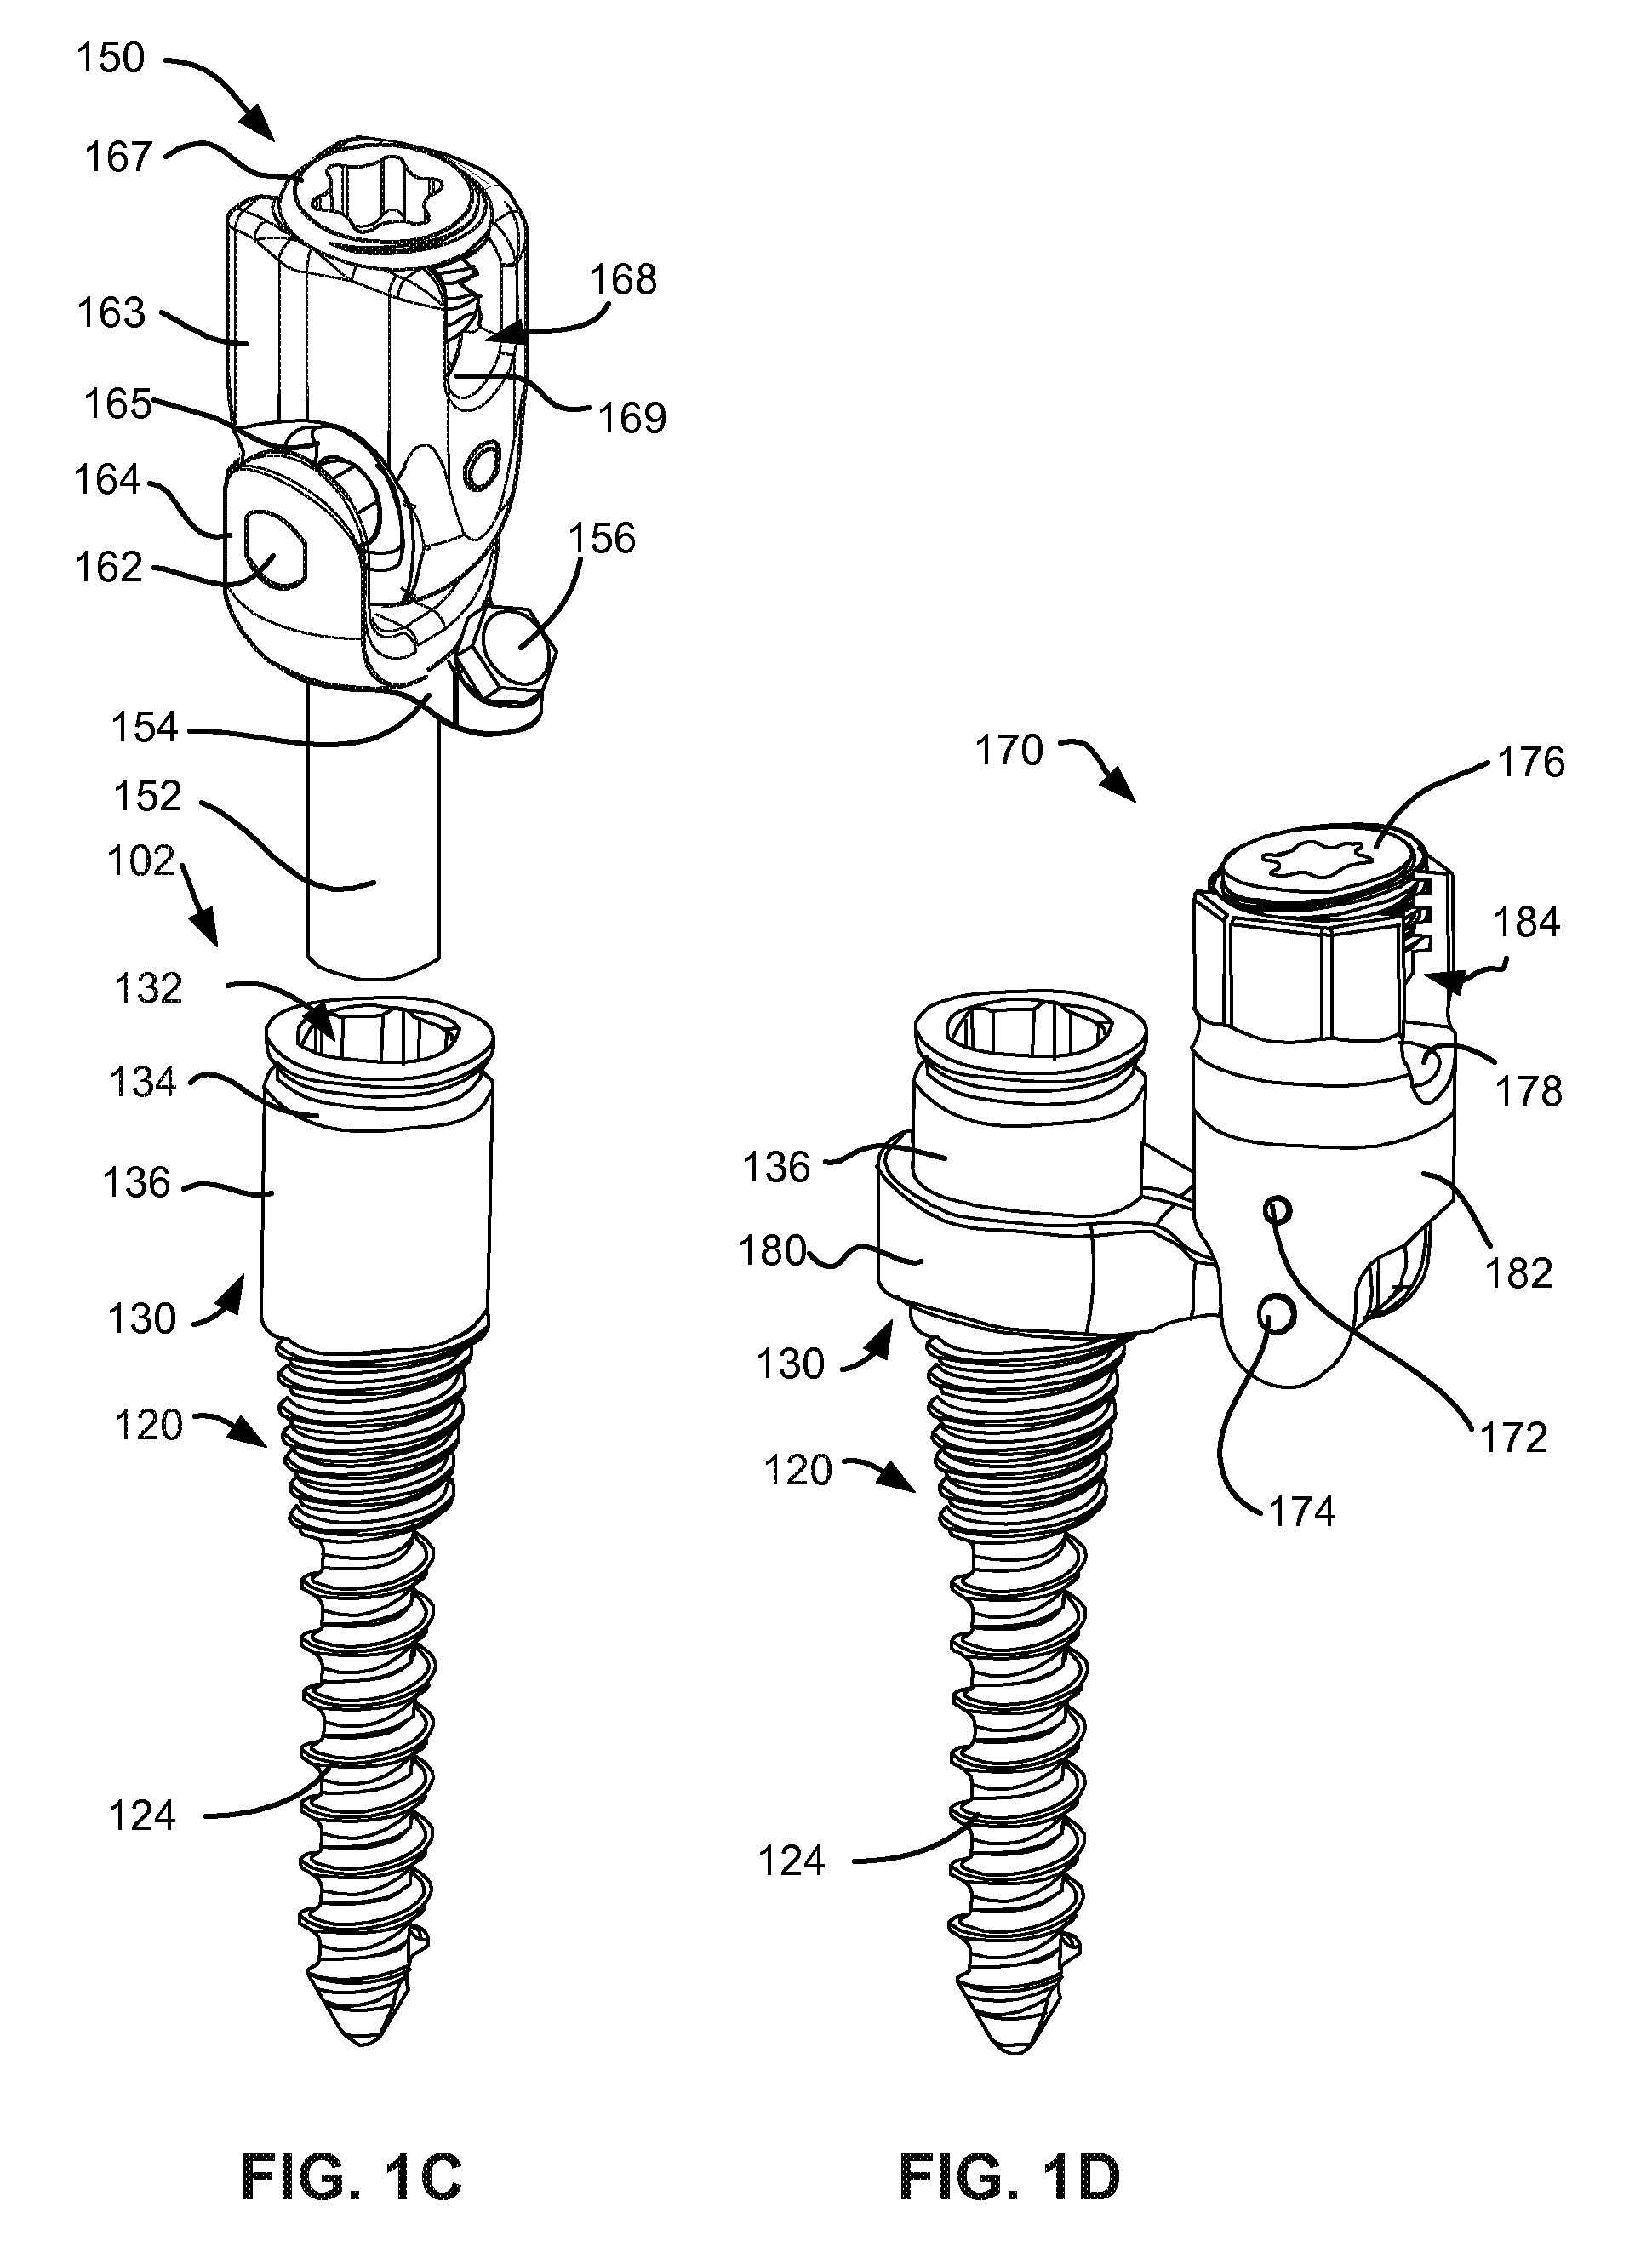 Load-sharing bone anchor having a deflectable post and method for dynamic stabilization of the spine